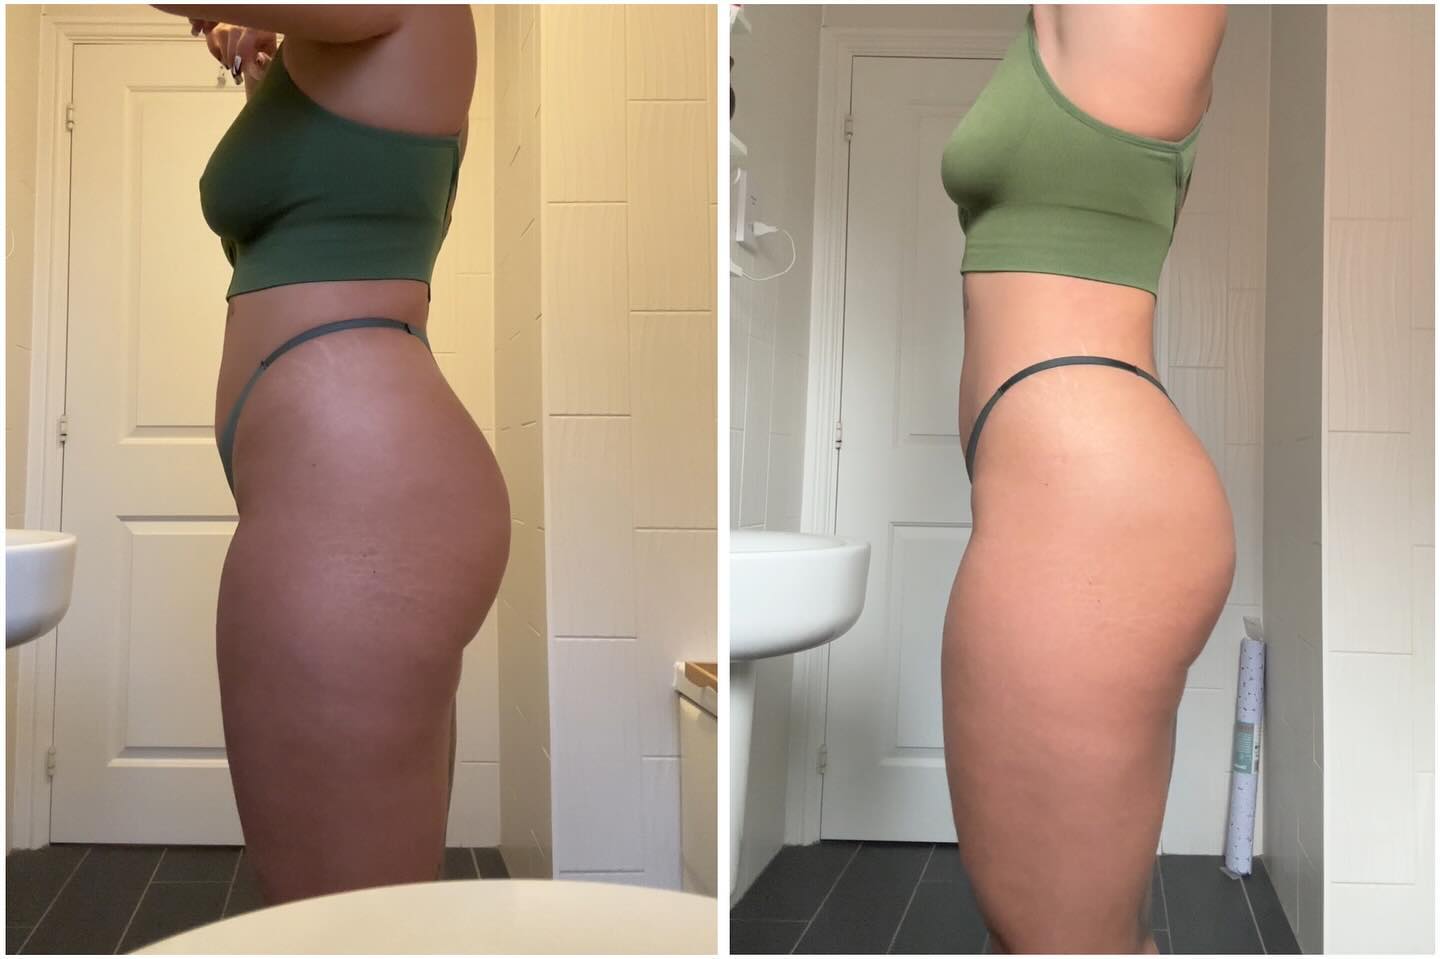 ✨12 Week Transformation✨ 

January 1st I made the decision after not long coming back from a 2 week all inclusive🐷 that I wasn’t happy with myself (who is🤷🏻‍♀️) and went into a 3 day fast straight into keto where I dropped most of the body fat. 

After getting to a point where I was happy with the way things were going but didn’t necessarily want to loose loads more fat (Mainly because you can’t spot reduce and I was worried I’d loose weight in places I didn’t want to lose, eg ass😂) I decided that now I wanted to focus a bit more on form and strength. 

Now you’d think I would have struggled more loosing the weight but now I’m trying to force myself to eat more as I’ve now entered a lean bulk phase which mentally is challenging as to me eating more = getting fat so I’m trying my hardest to get out of that mindset🙄 So here we are, 9 weeks cut and now 3 weeks into a lean - ish bulk to gain some muscle mass and strength💪🏽😌 Let’s see what else I can achieve in another 12 weeks for summer⛅️